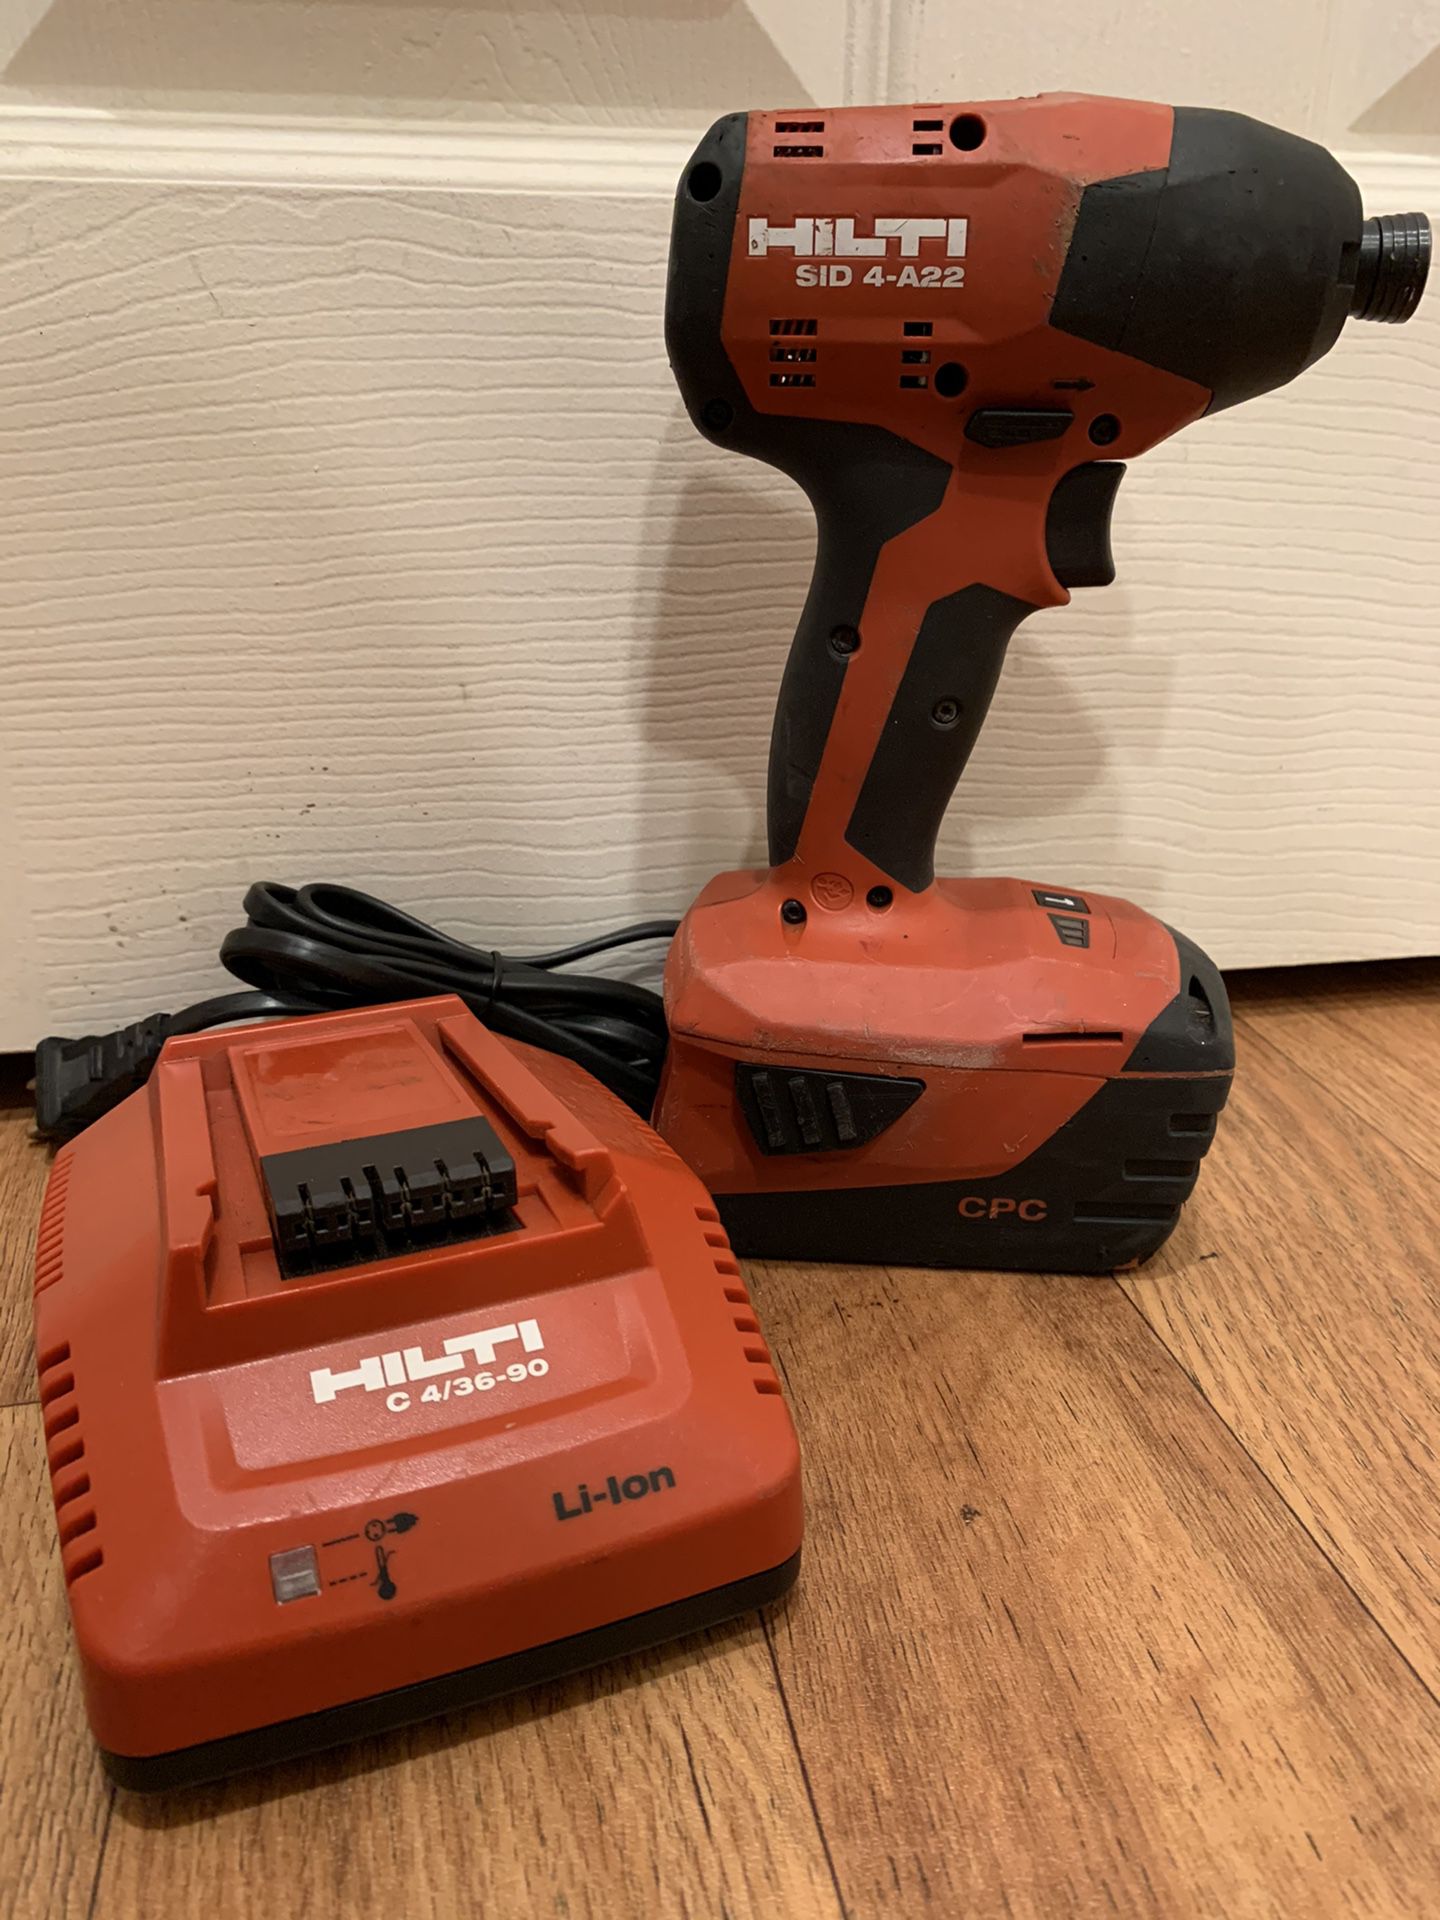 Hilti 22 volts impact driver with battery and charger. Excellent working condition. $130 price is firm